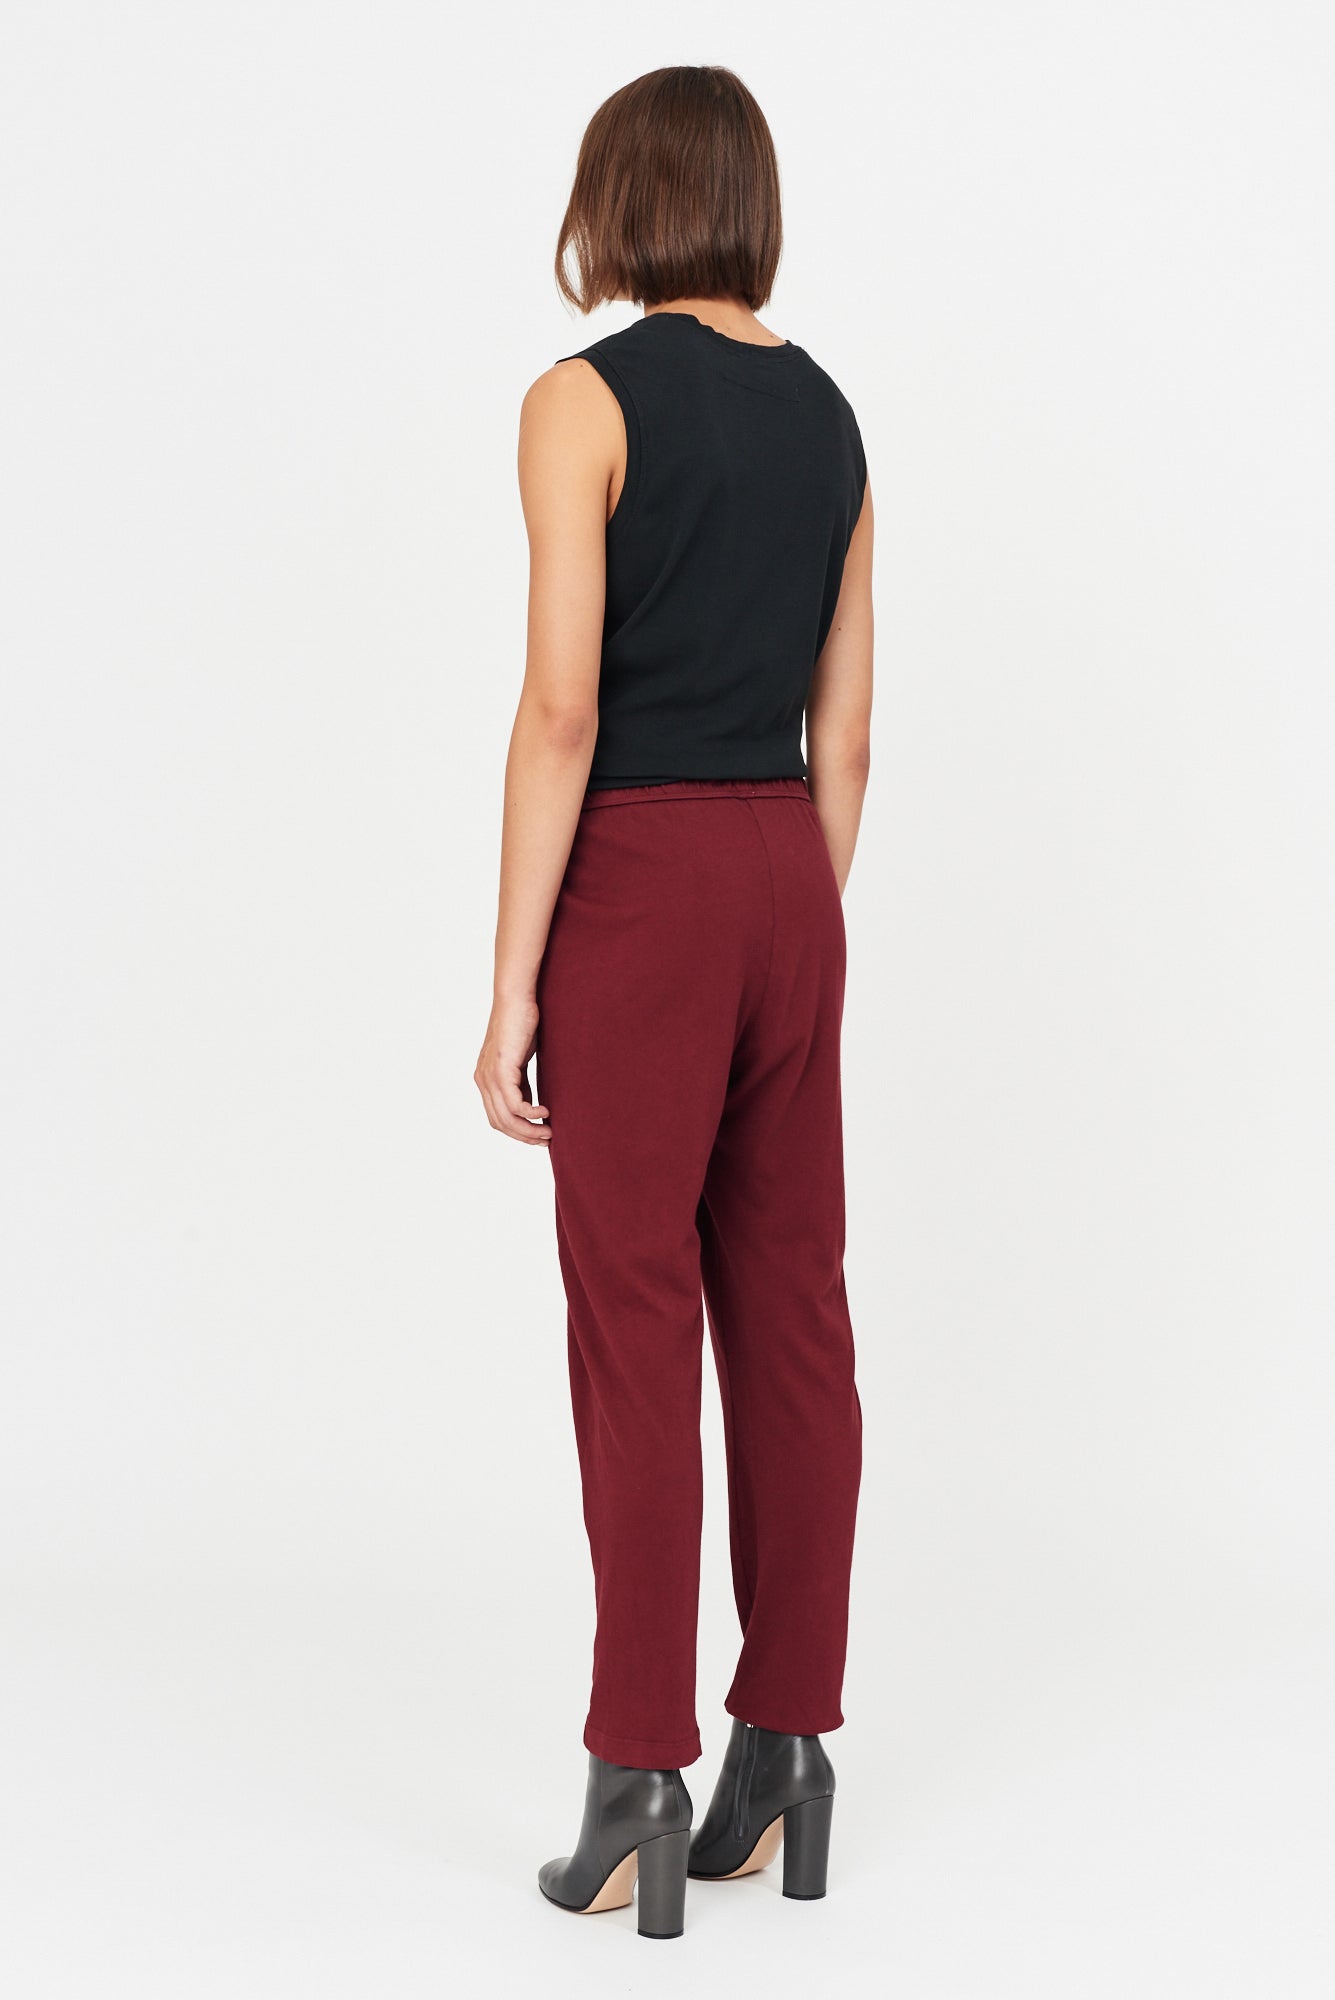 Sienna Classic Jersey Easy Pant Full Back View